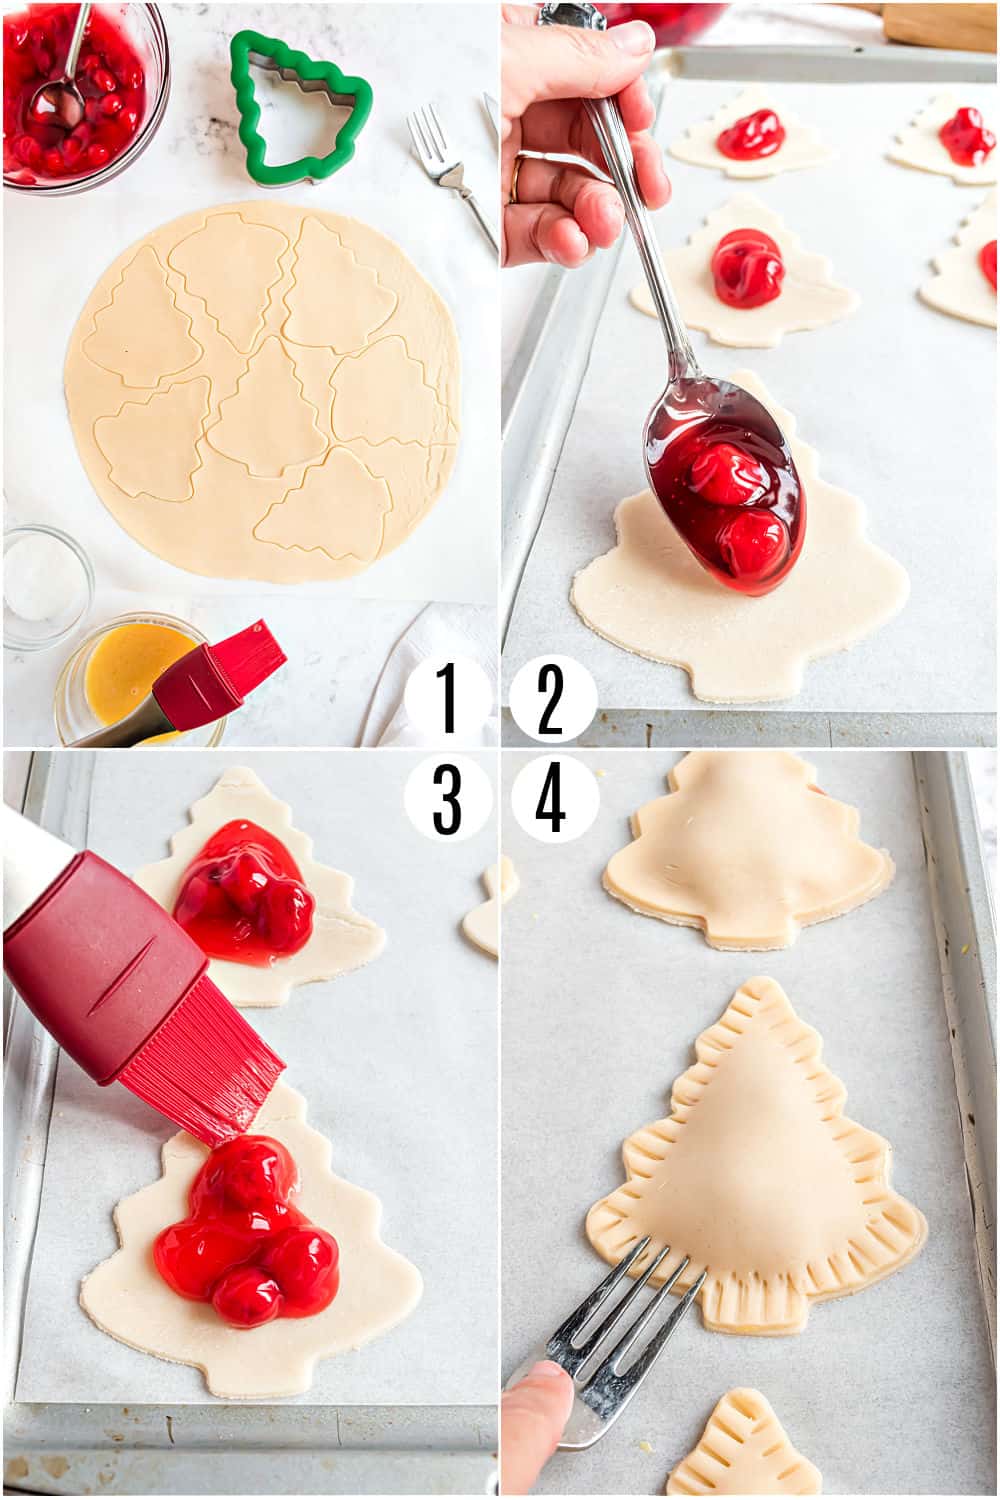 Step by step photos showing how to make cherry hand pies in the shape of a christmas tree.